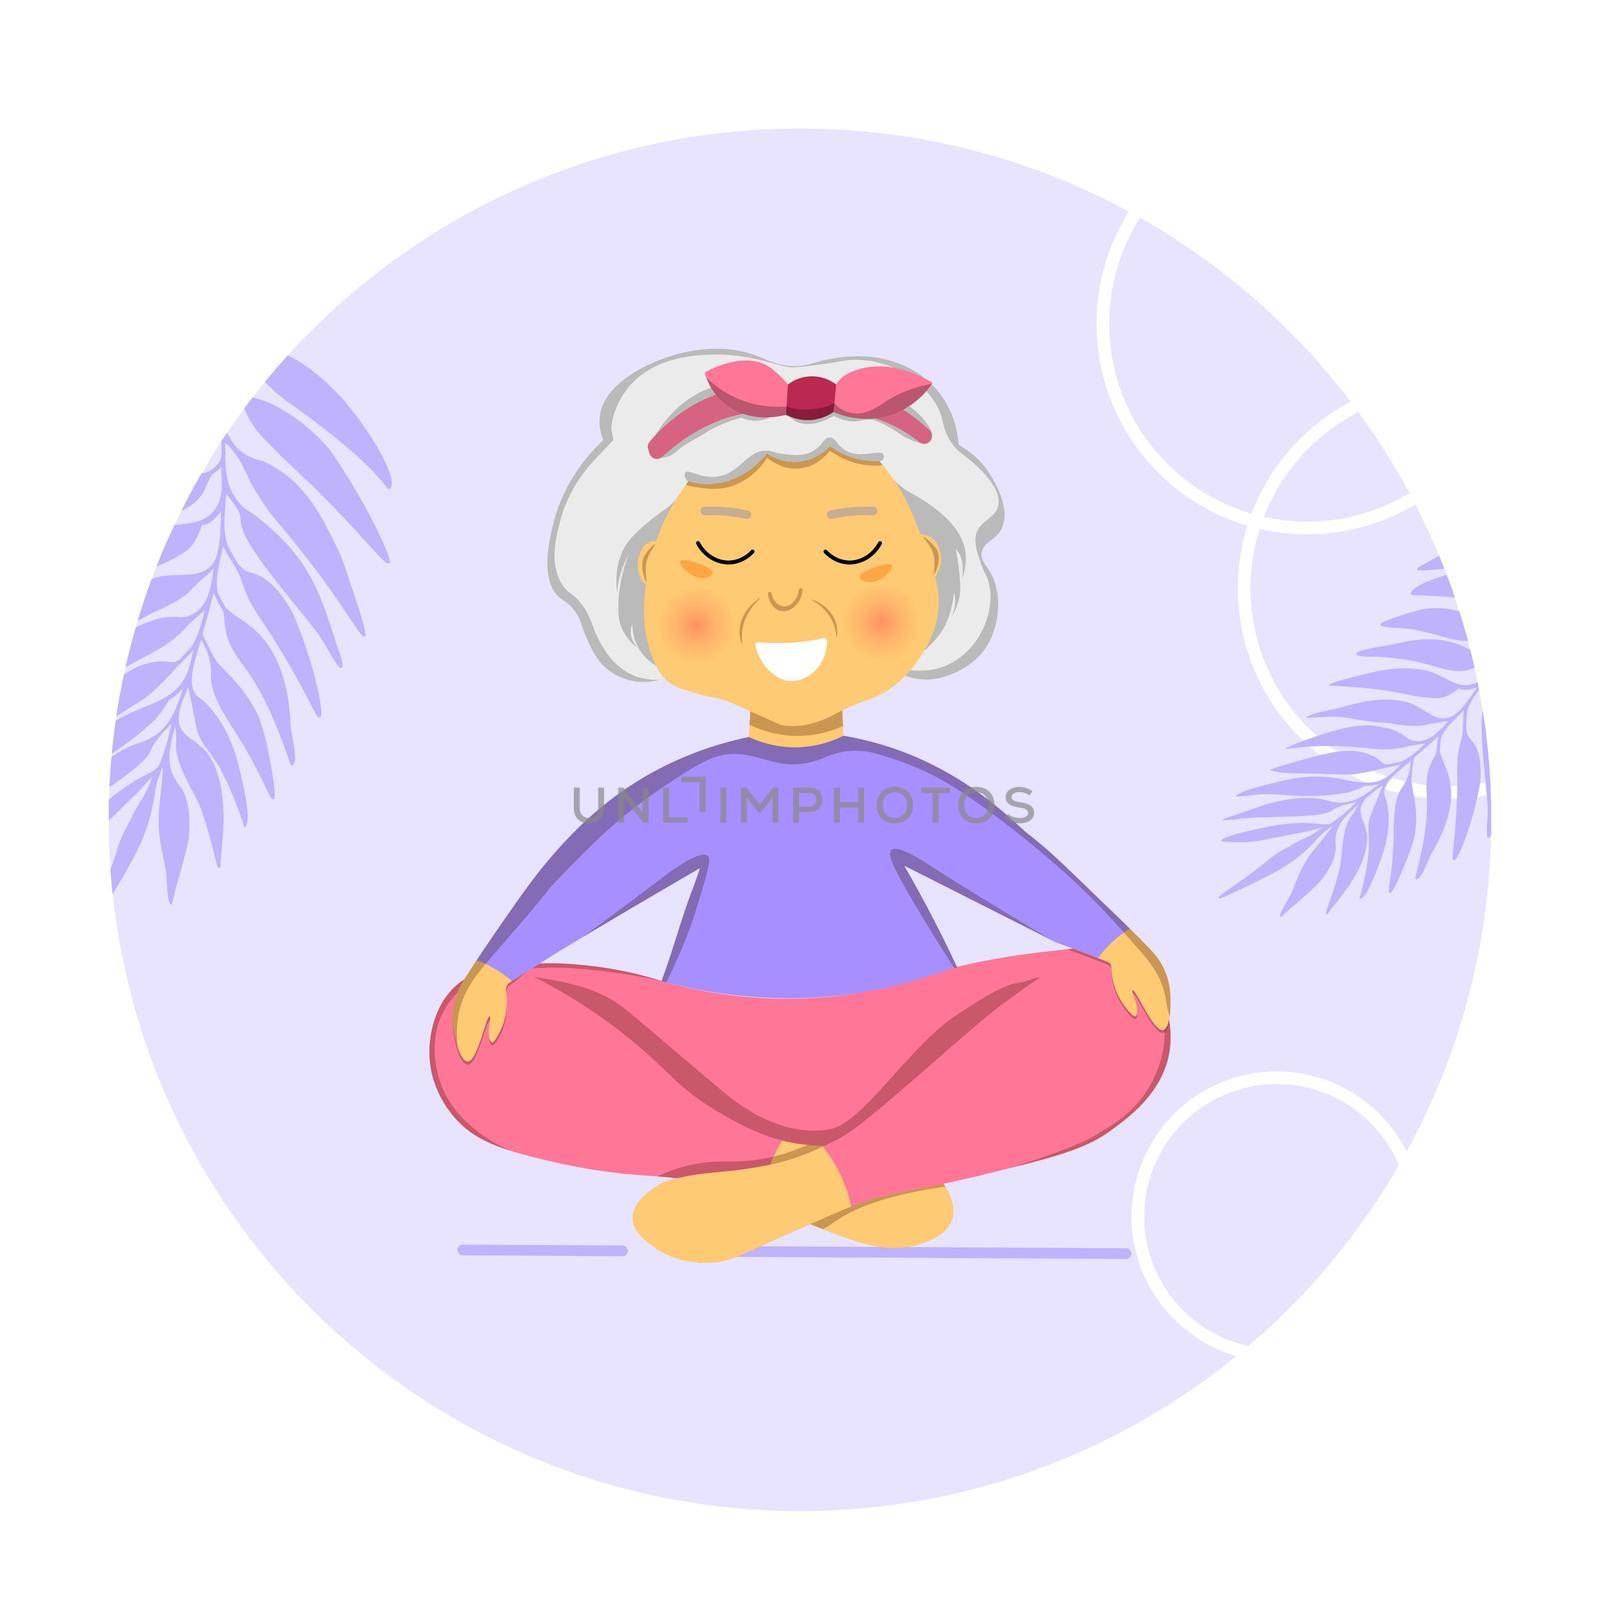 Sporty Granny does Yoga. Old person. Vector colorful cartoon illustration. Senior woman in pose yoga. Exercising for better health. Isolated flat image. Grandma. Grandmother character. by allaku